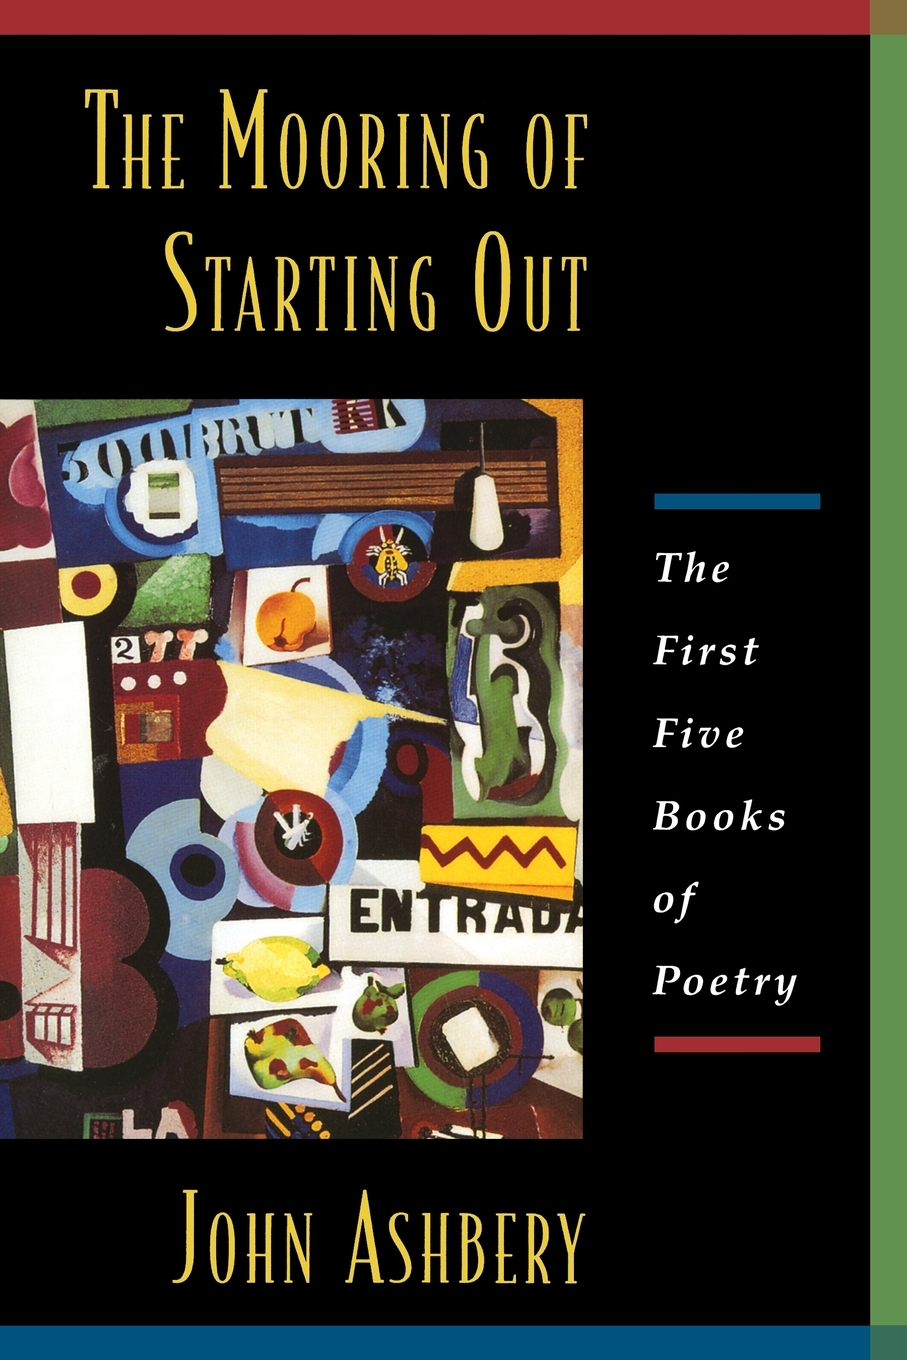 The Mooring of Starting Out: The First Five Books of Poetry by John Ashbery